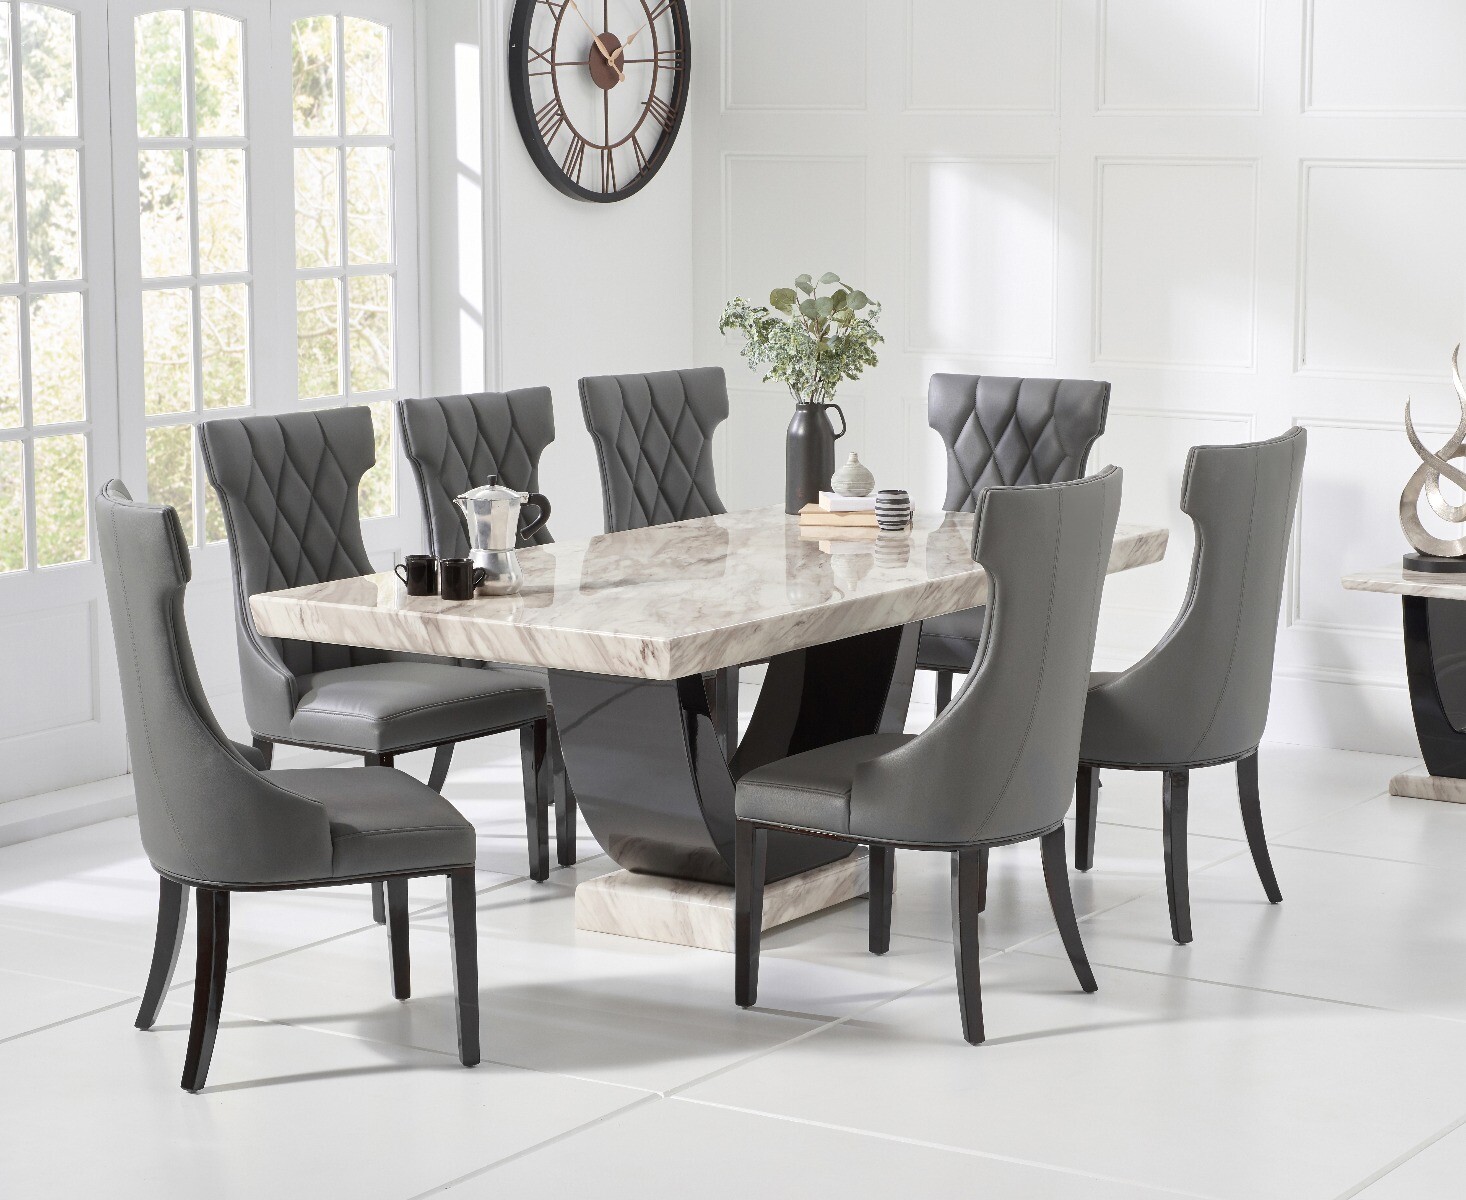 Novara 200cm Cream And Black Pedestal Marble Dining Table With 10 Grey Sophia Chairs